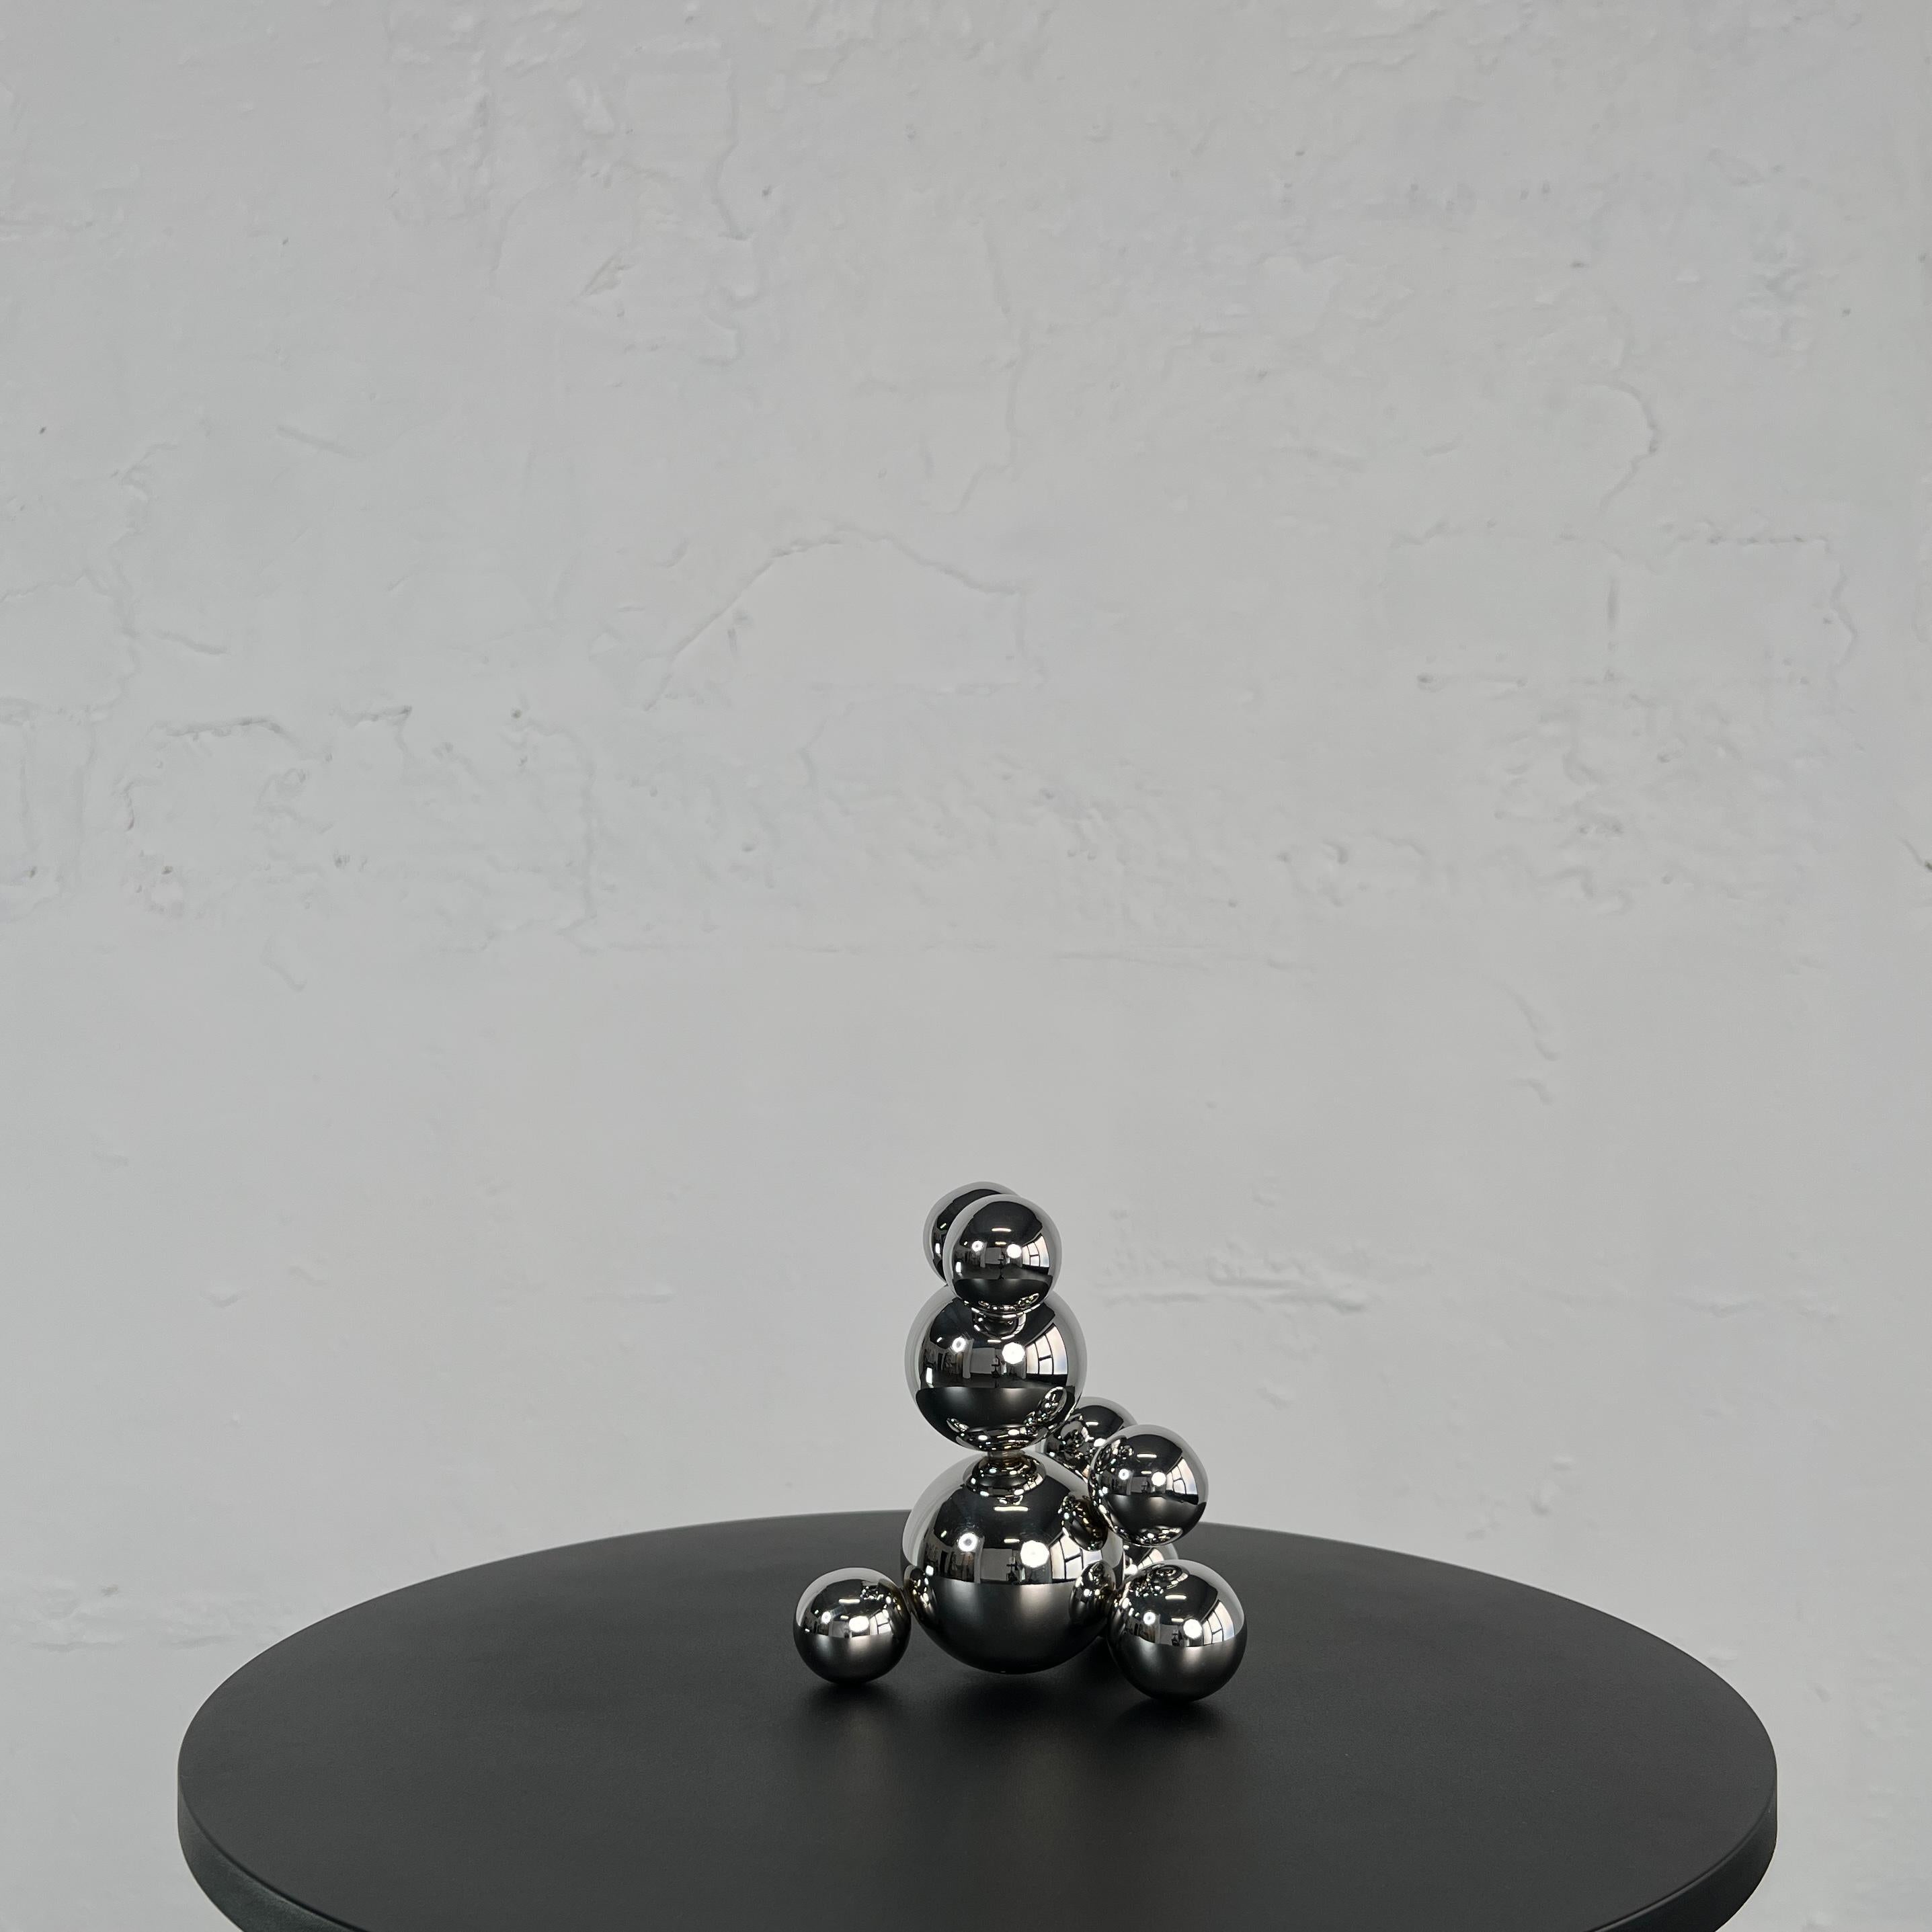 Tiny Stainless Steel Bear 'Ricky' Sculpture Minimalistic Animal For Sale 4